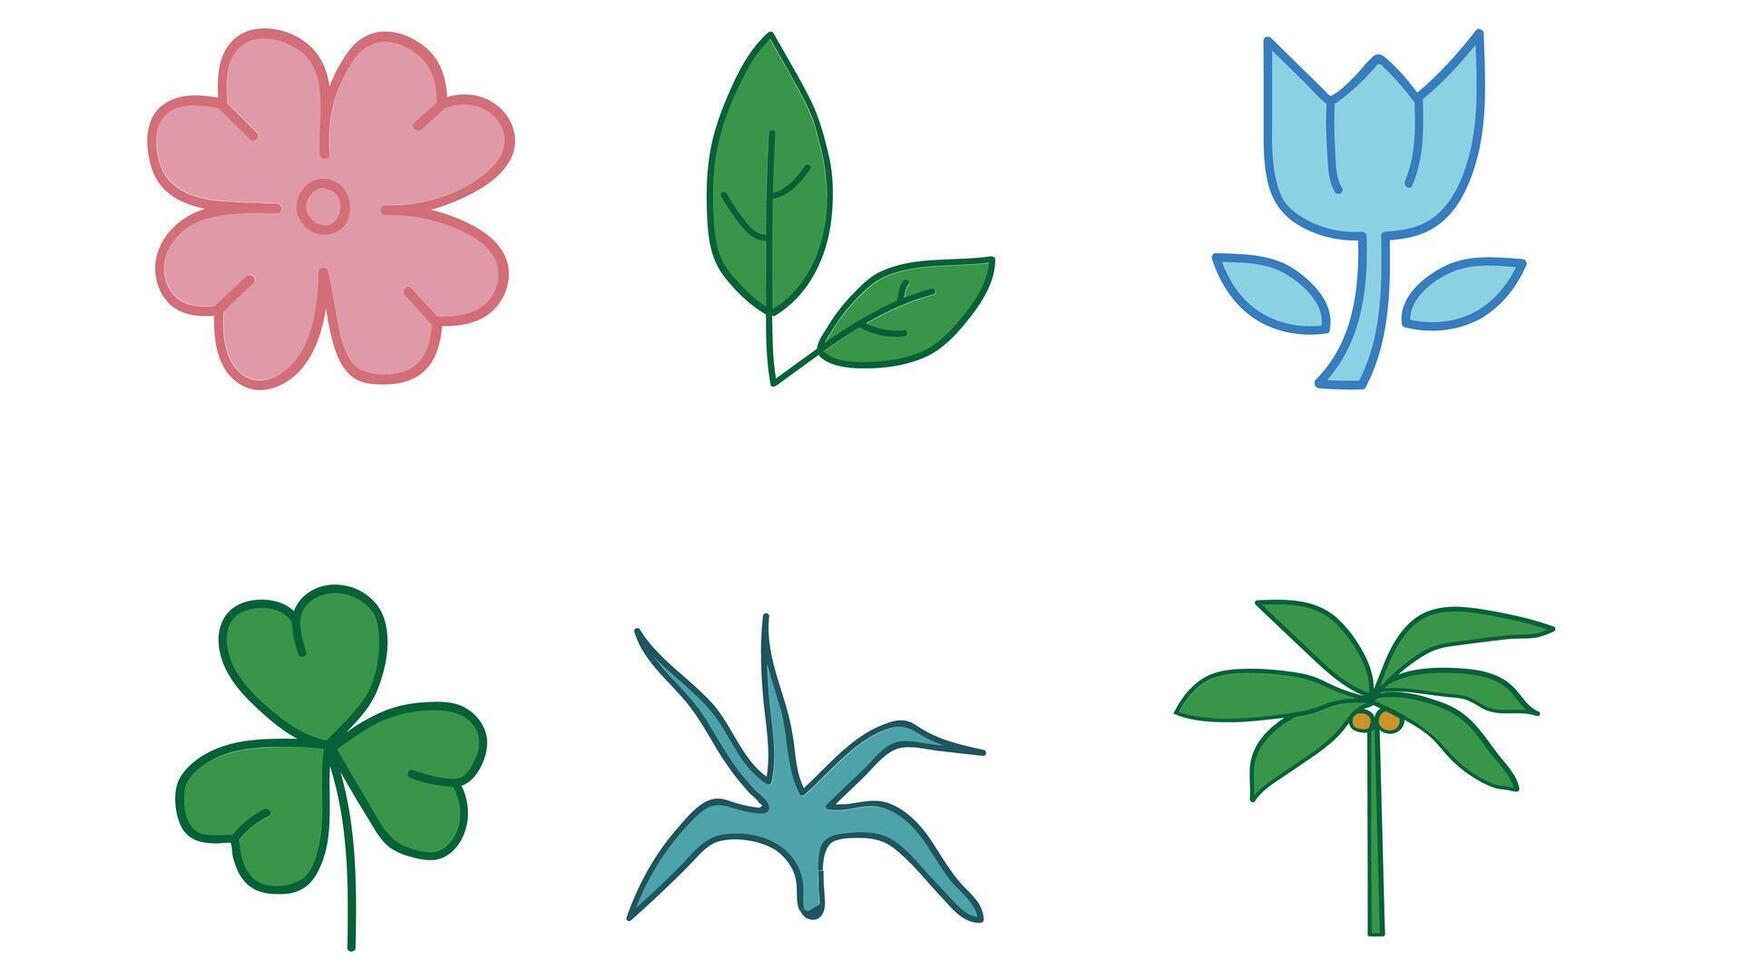 Natural leaves and trees design  vector icons isolated illustration